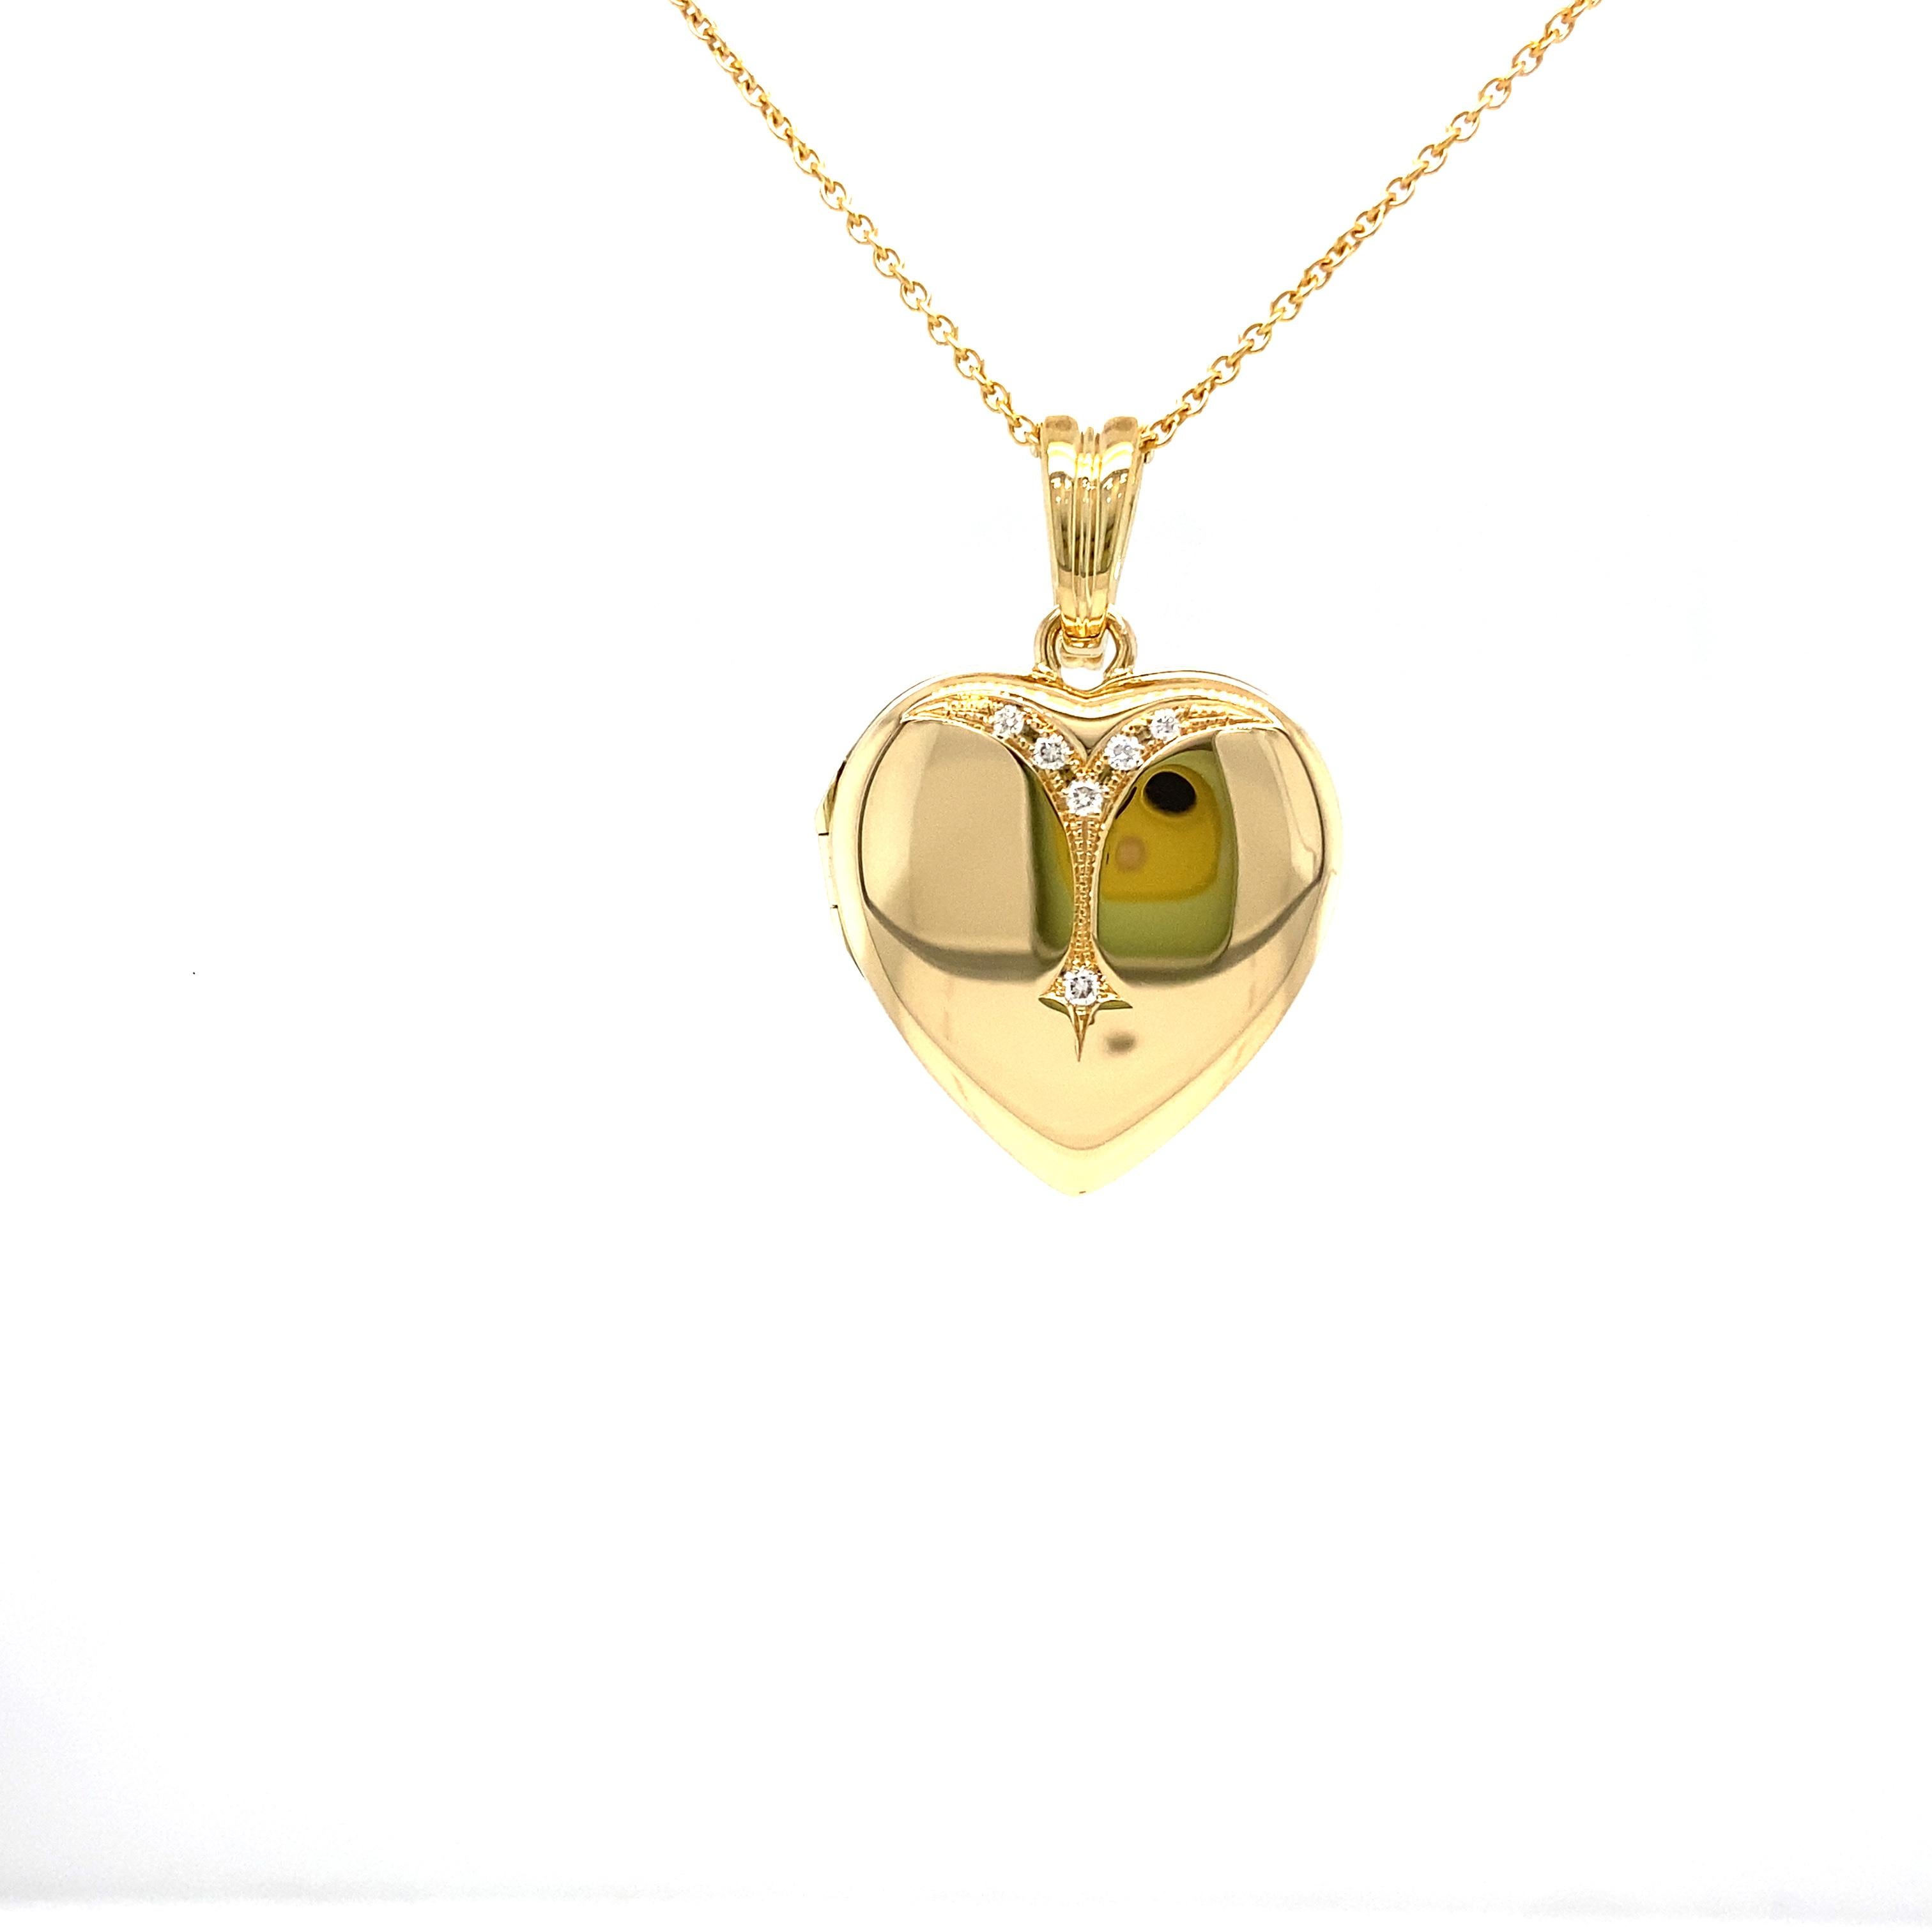 Victor Mayer customizable polished heart-shaped locket pendant necklace 18k yellow gold, Hallmark collection, 6 Diamonds, total 0.09 ct, H VS, brilliant cut, diameter app. 22.0 mm

About the creator Victor Mayer
Victor Mayer is internationally